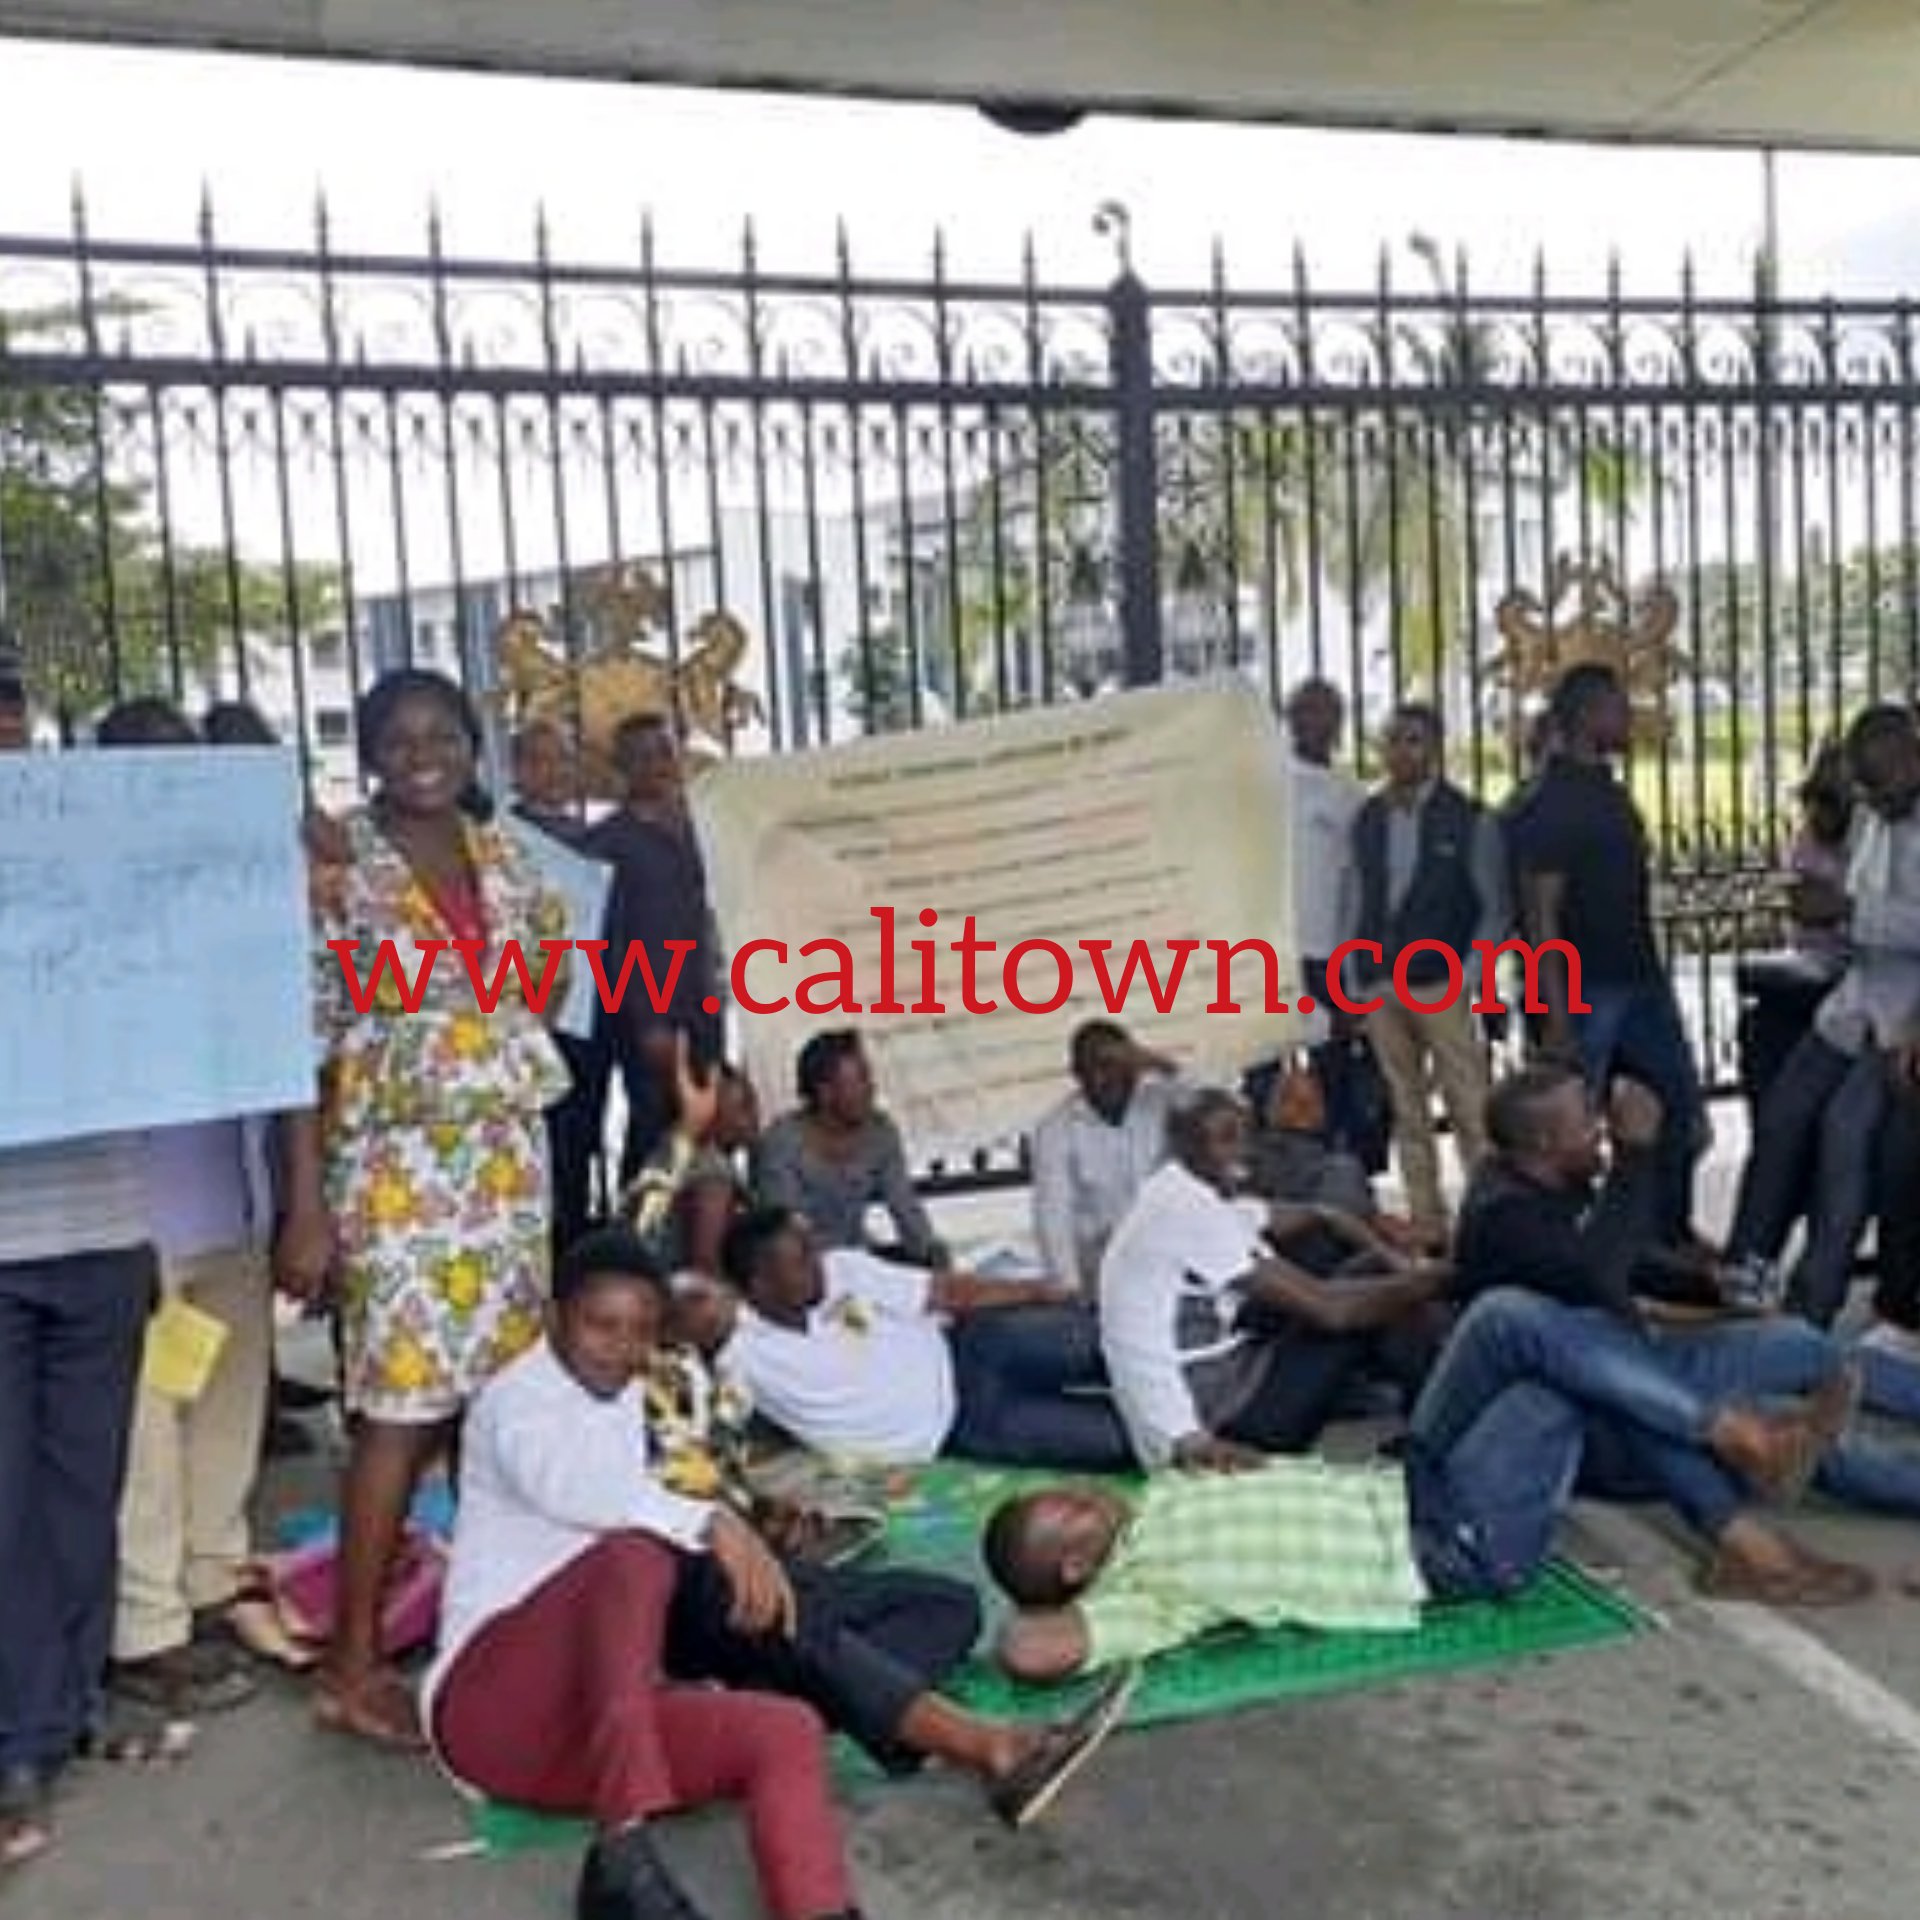 CALABAR: Protesters Storm Gov’s Office With Sleeping Mats